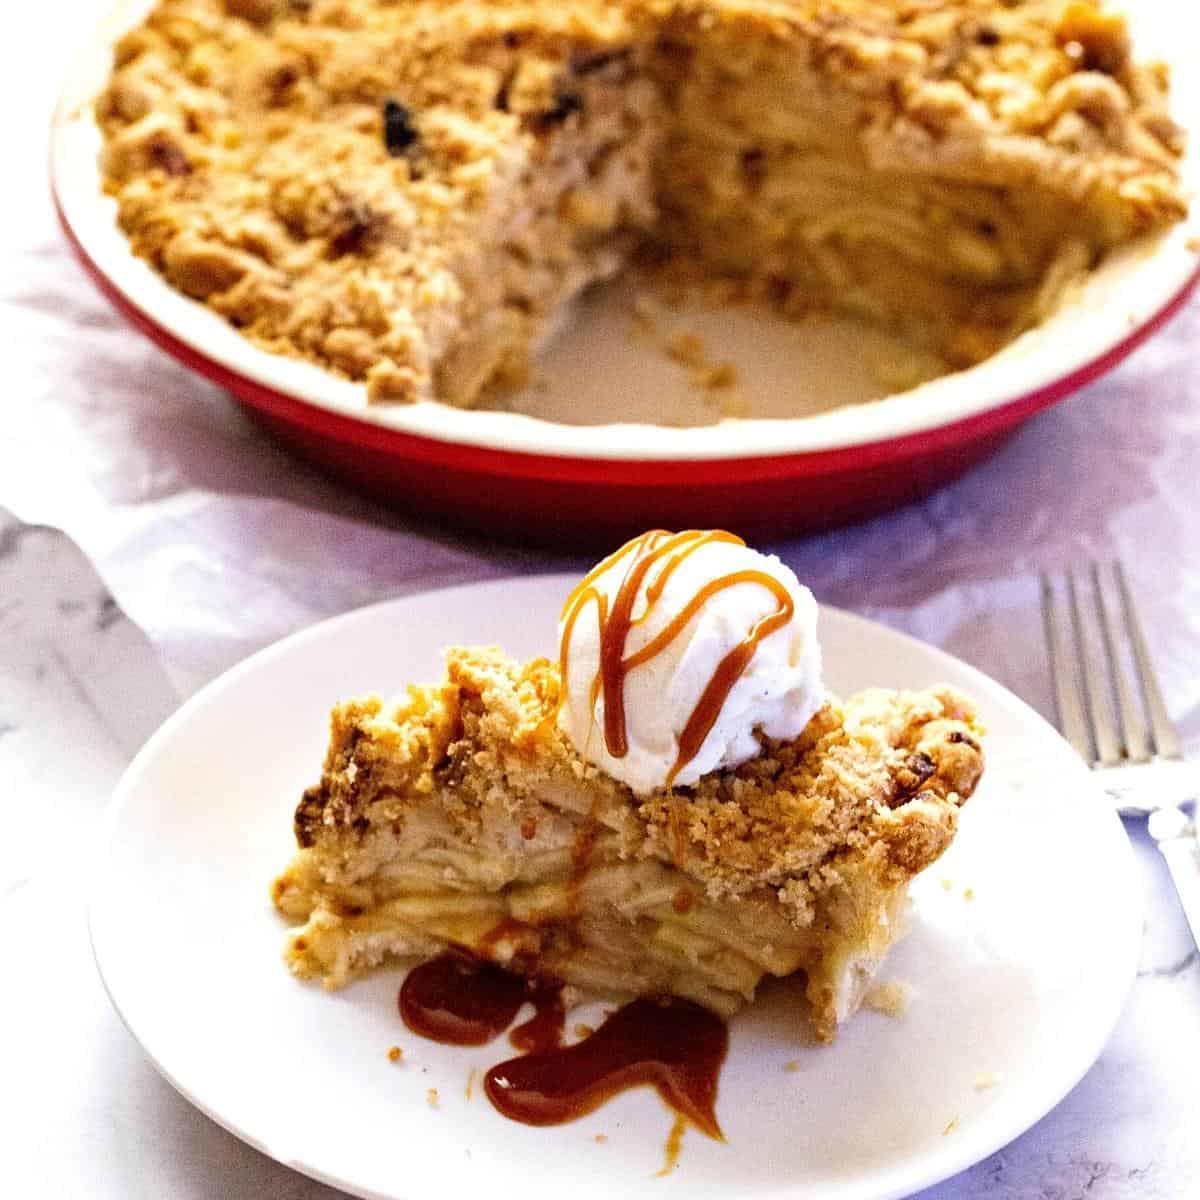 A slice of apple pie with crumbles.